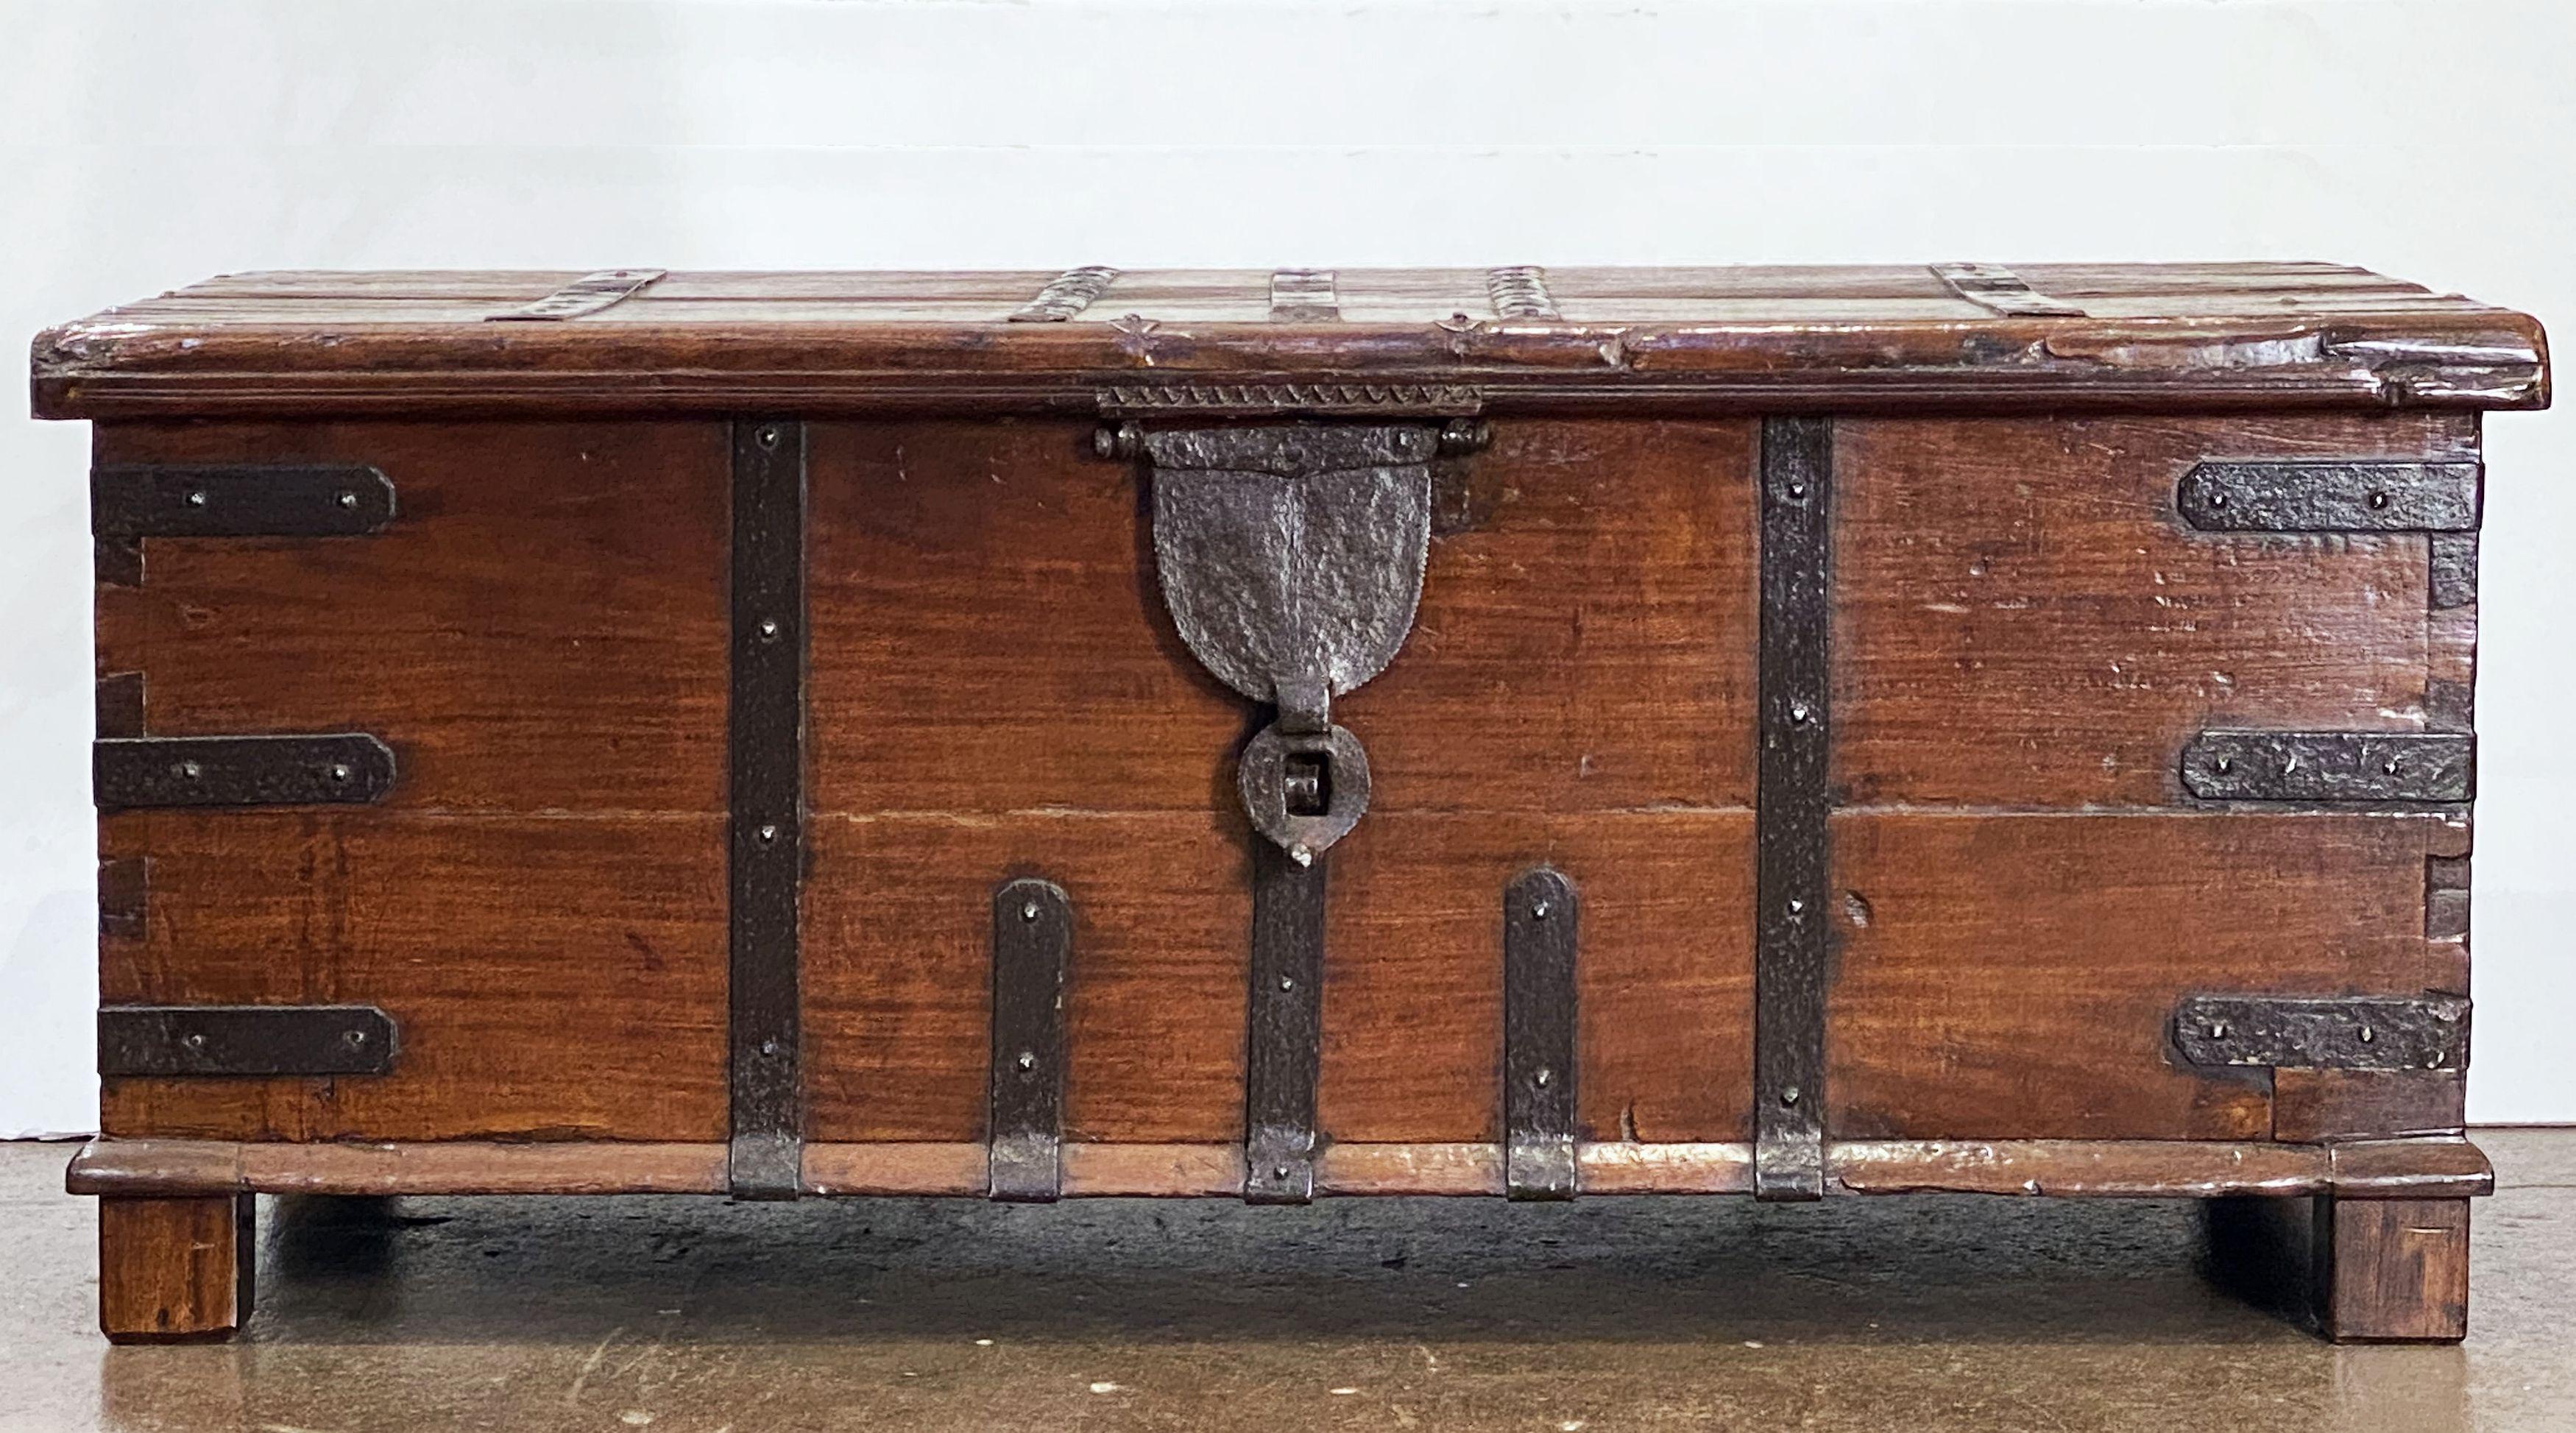 A handsome large 19th century rectangular iron-bound wooden coffer box or Rajasthan trunk from British Colonial India (The Raj), c.1860, featuring a hinged top hatch with storage inside.

Traditionally used for patio storage in Indian havelis -